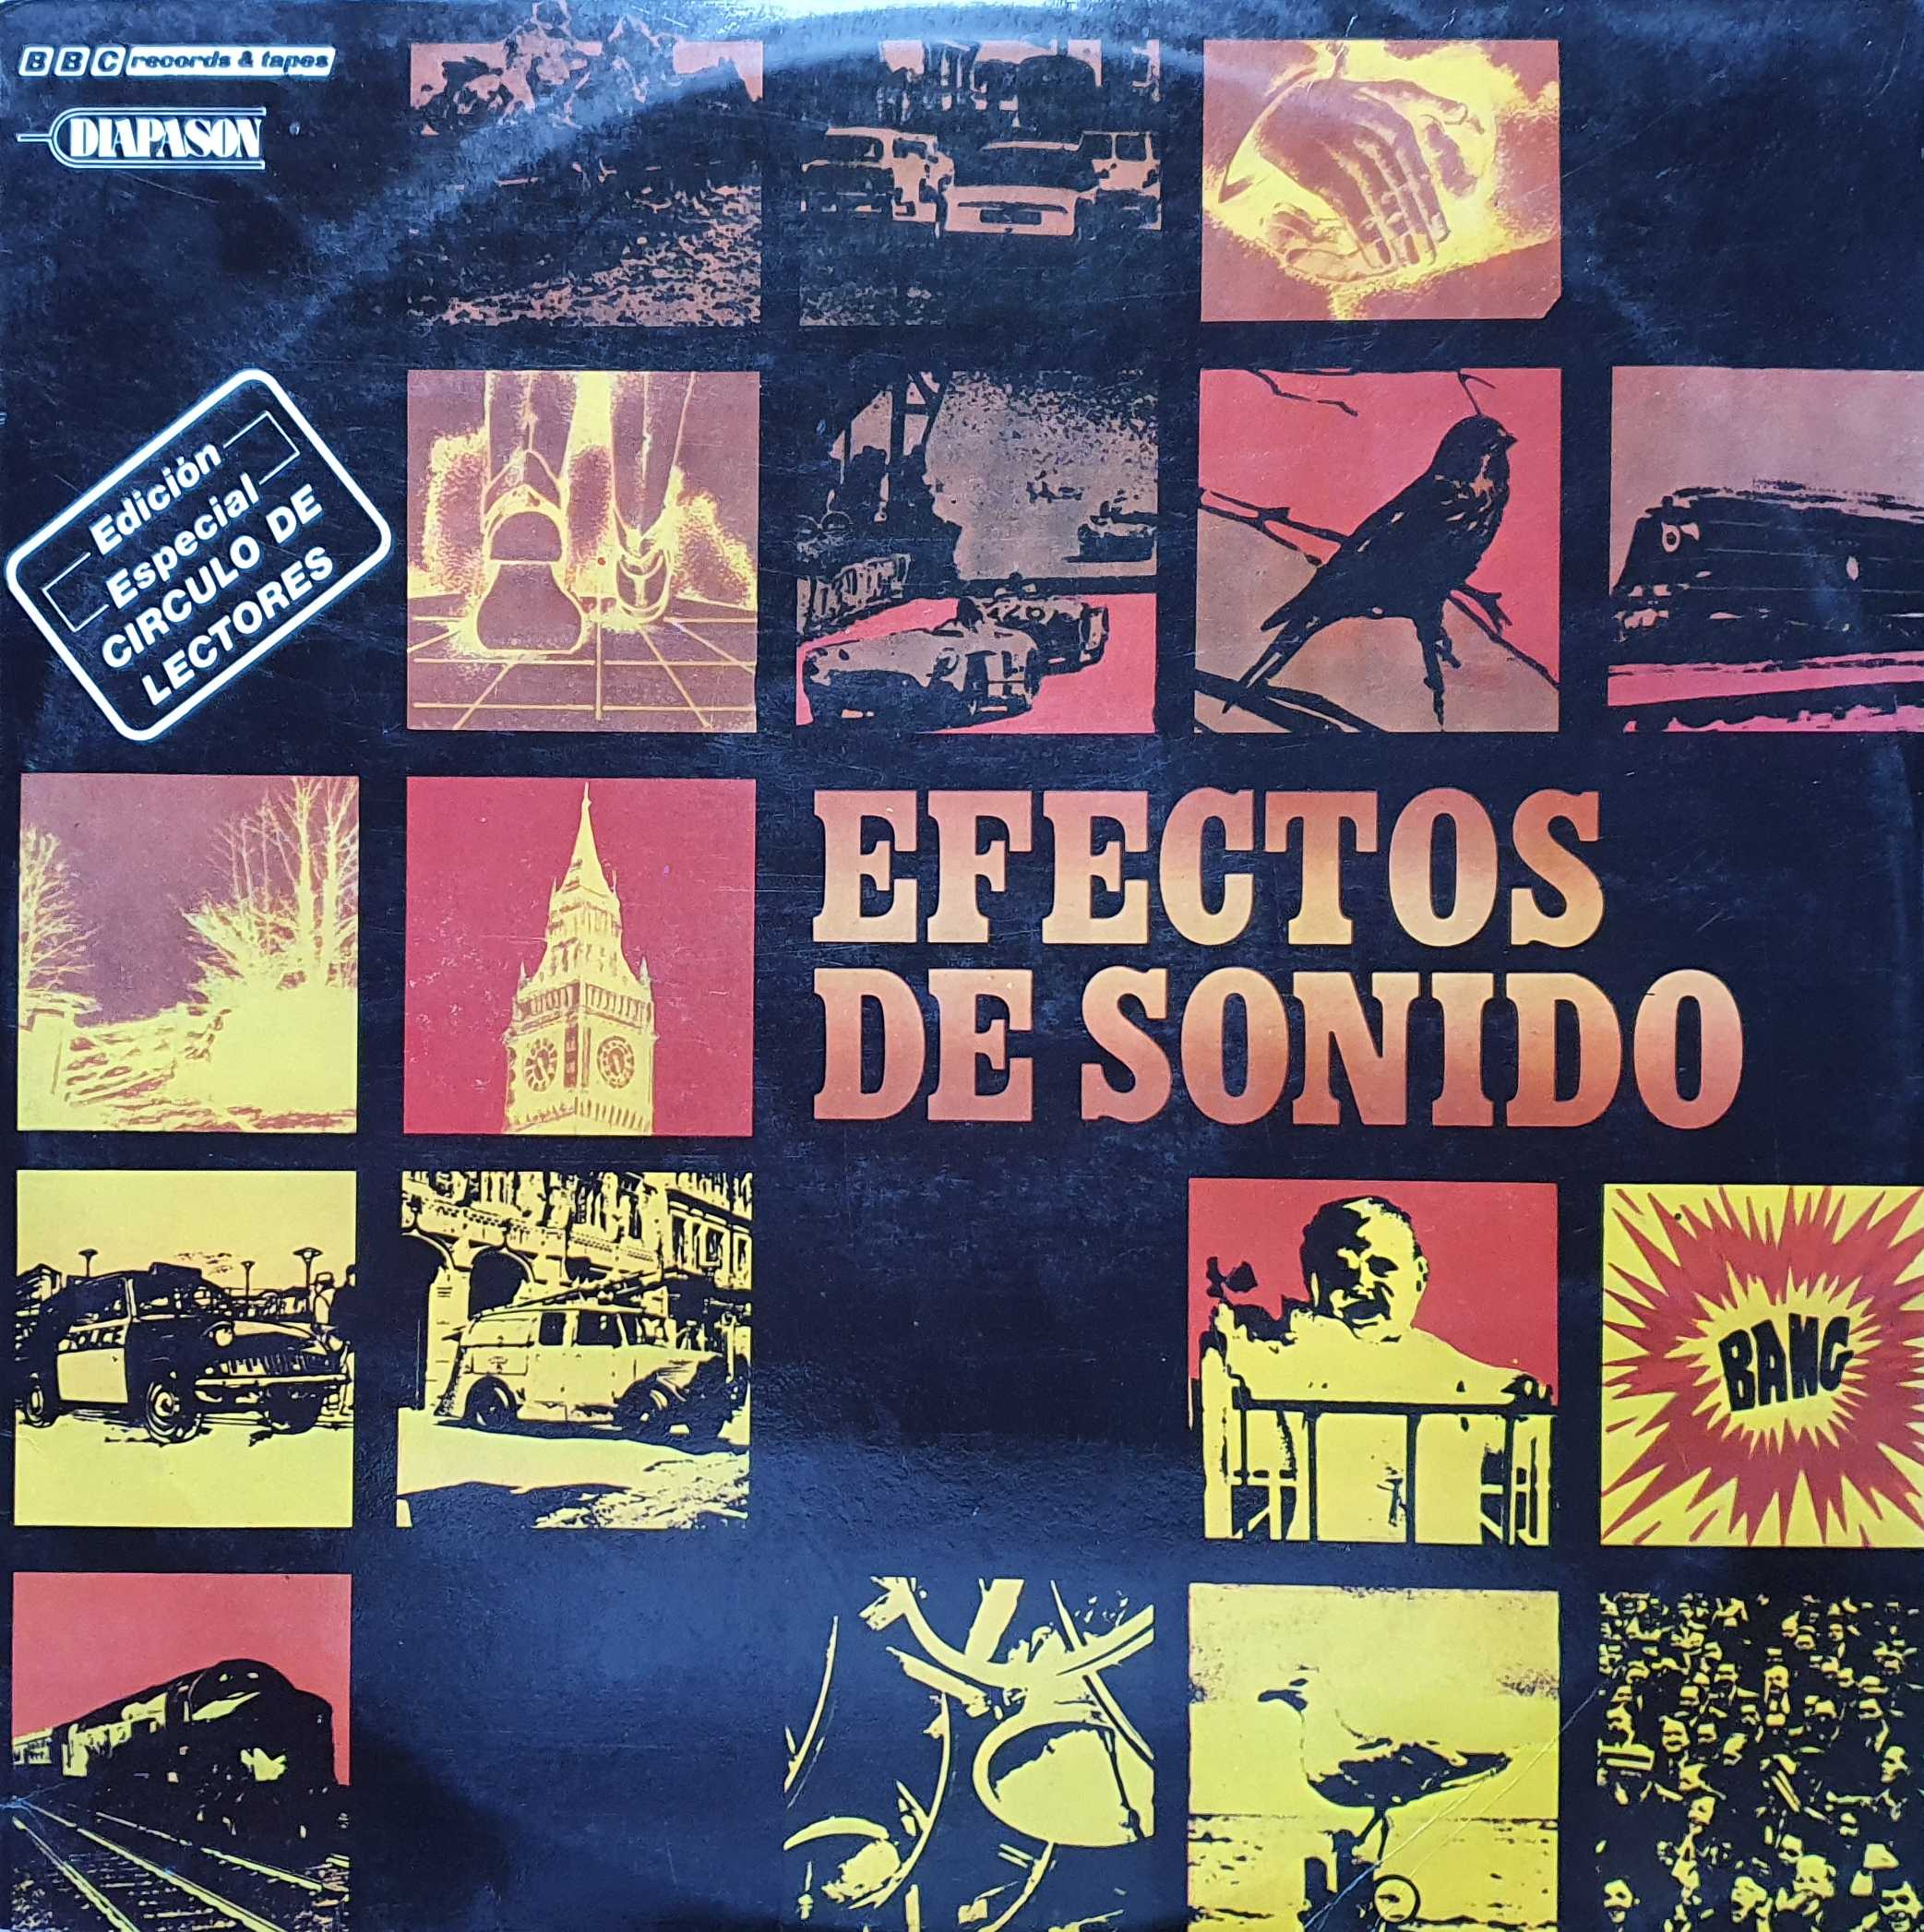 Picture of 53.744 Efectos de Sonido - Horror (Spanish import) by artist Various from the BBC albums - Records and Tapes library